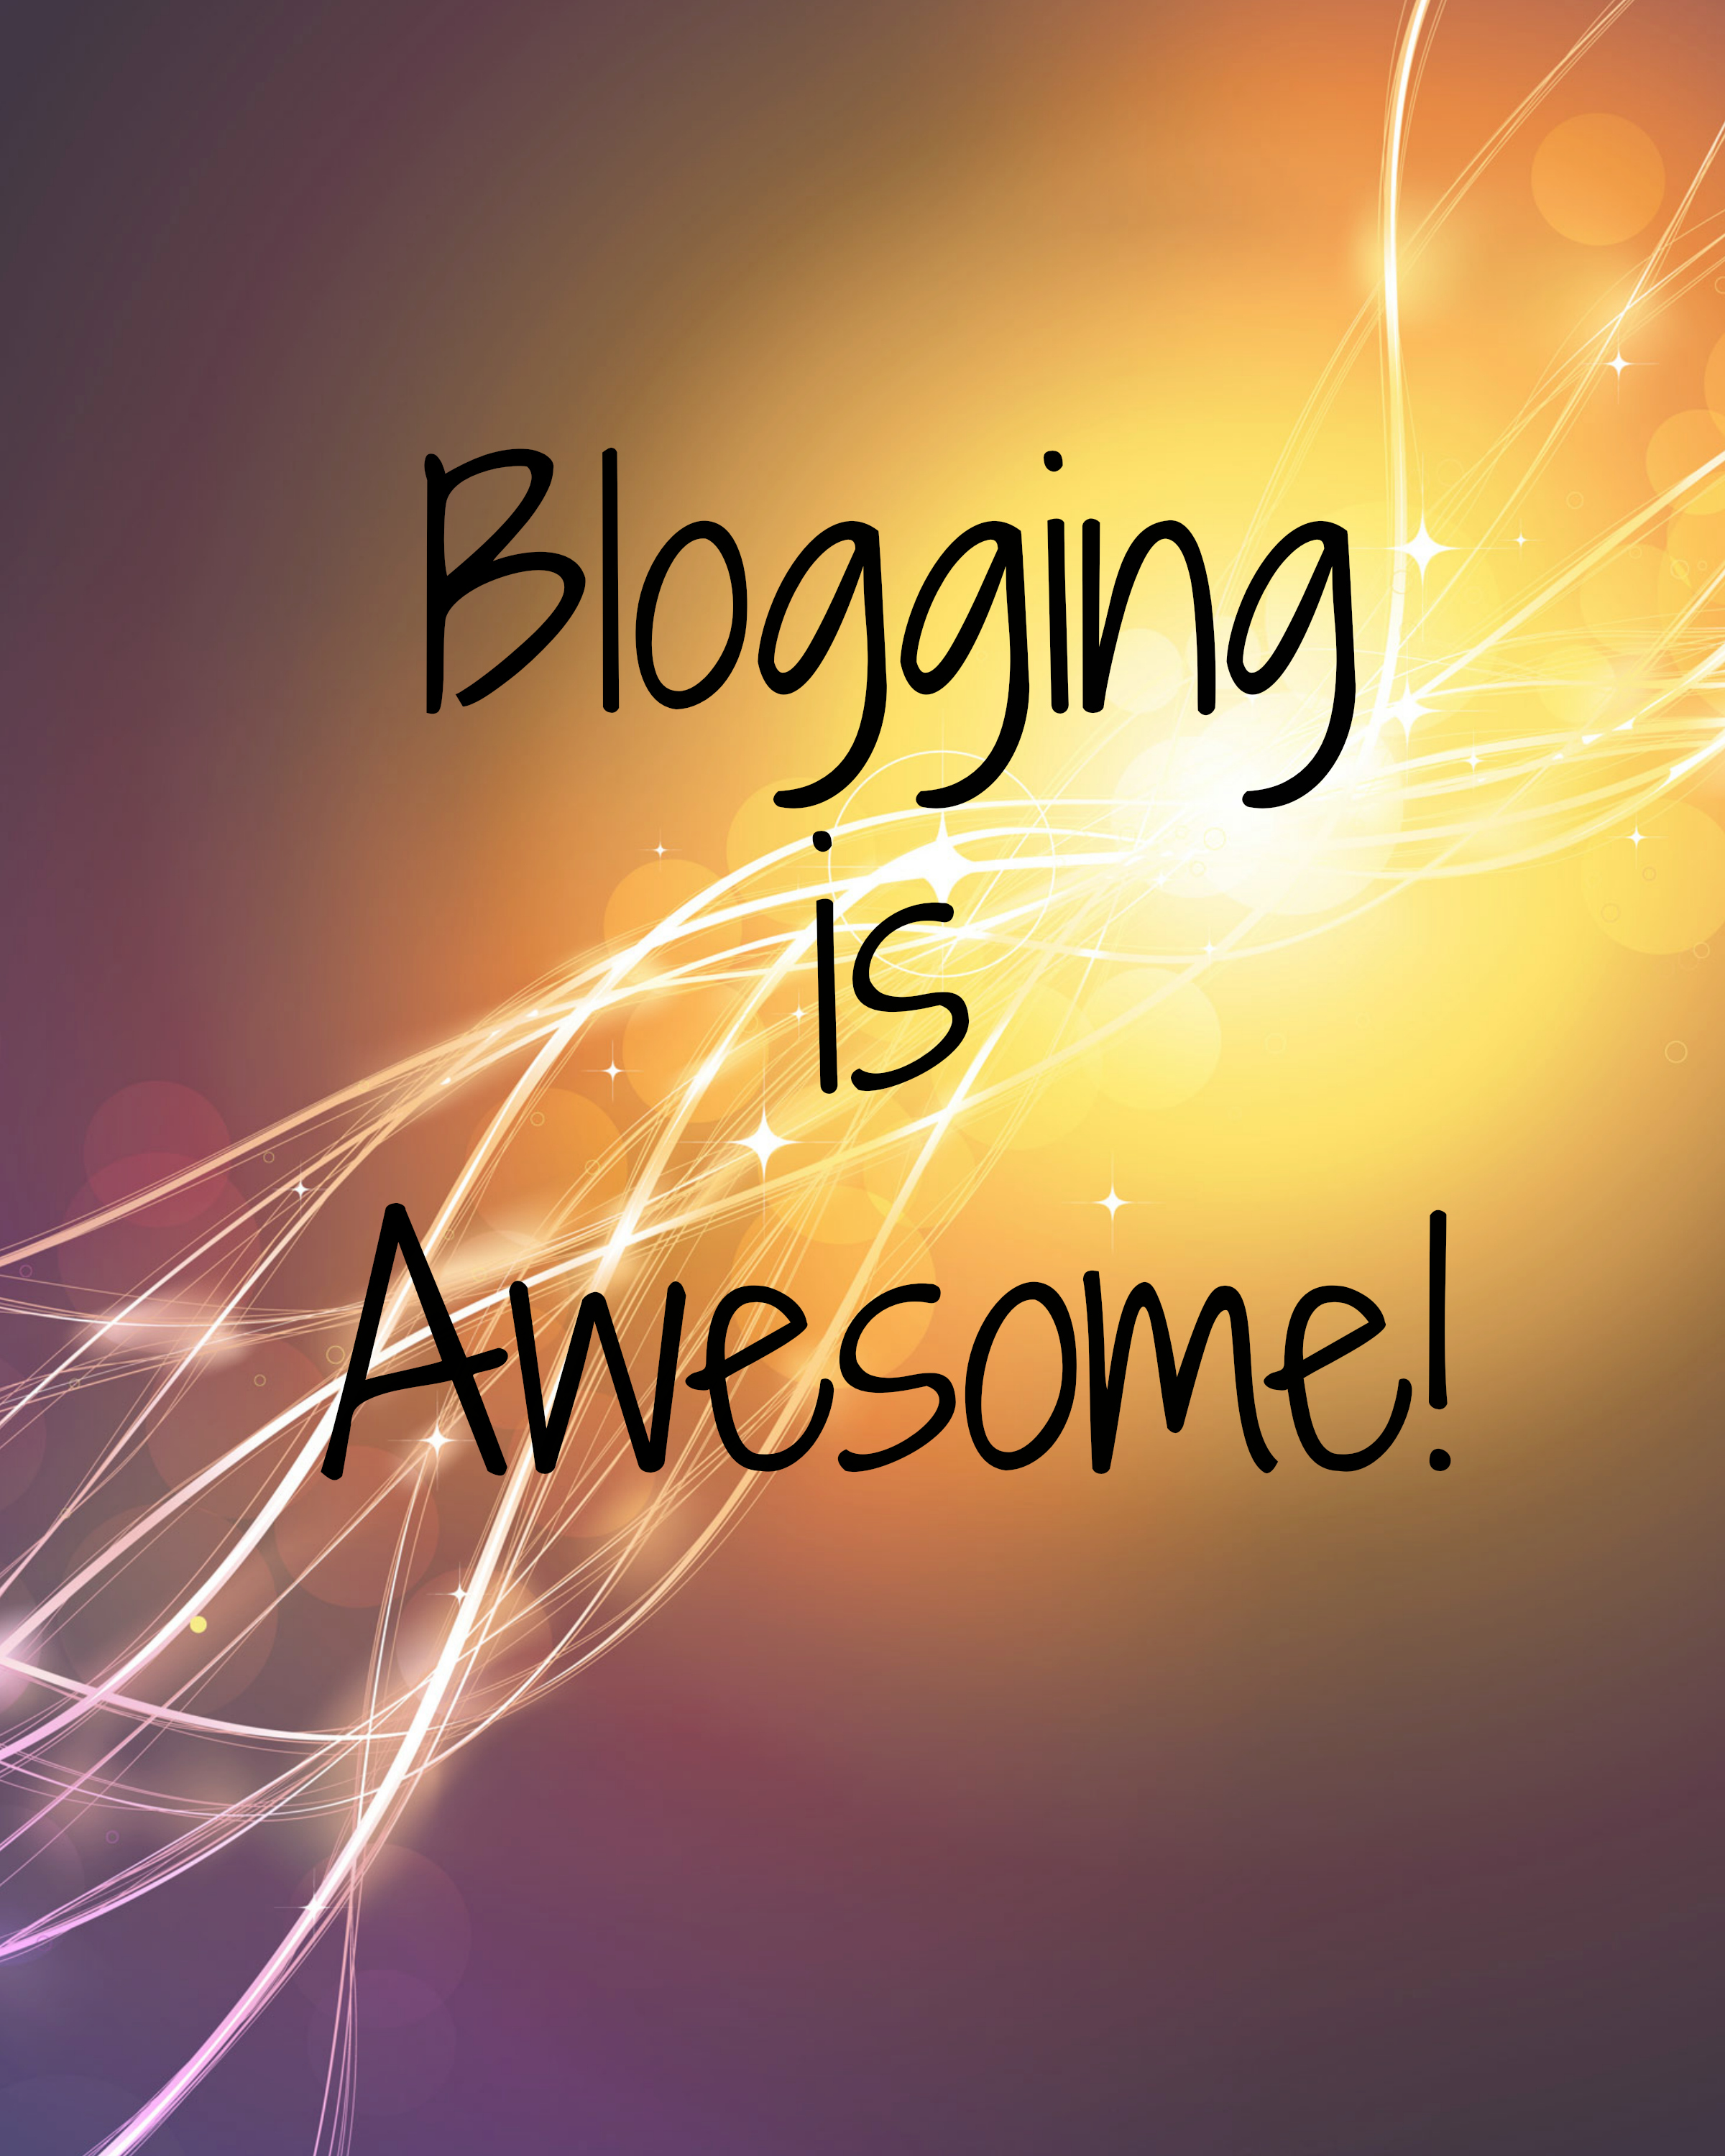 blogging is awesome - what makes you love blogging?